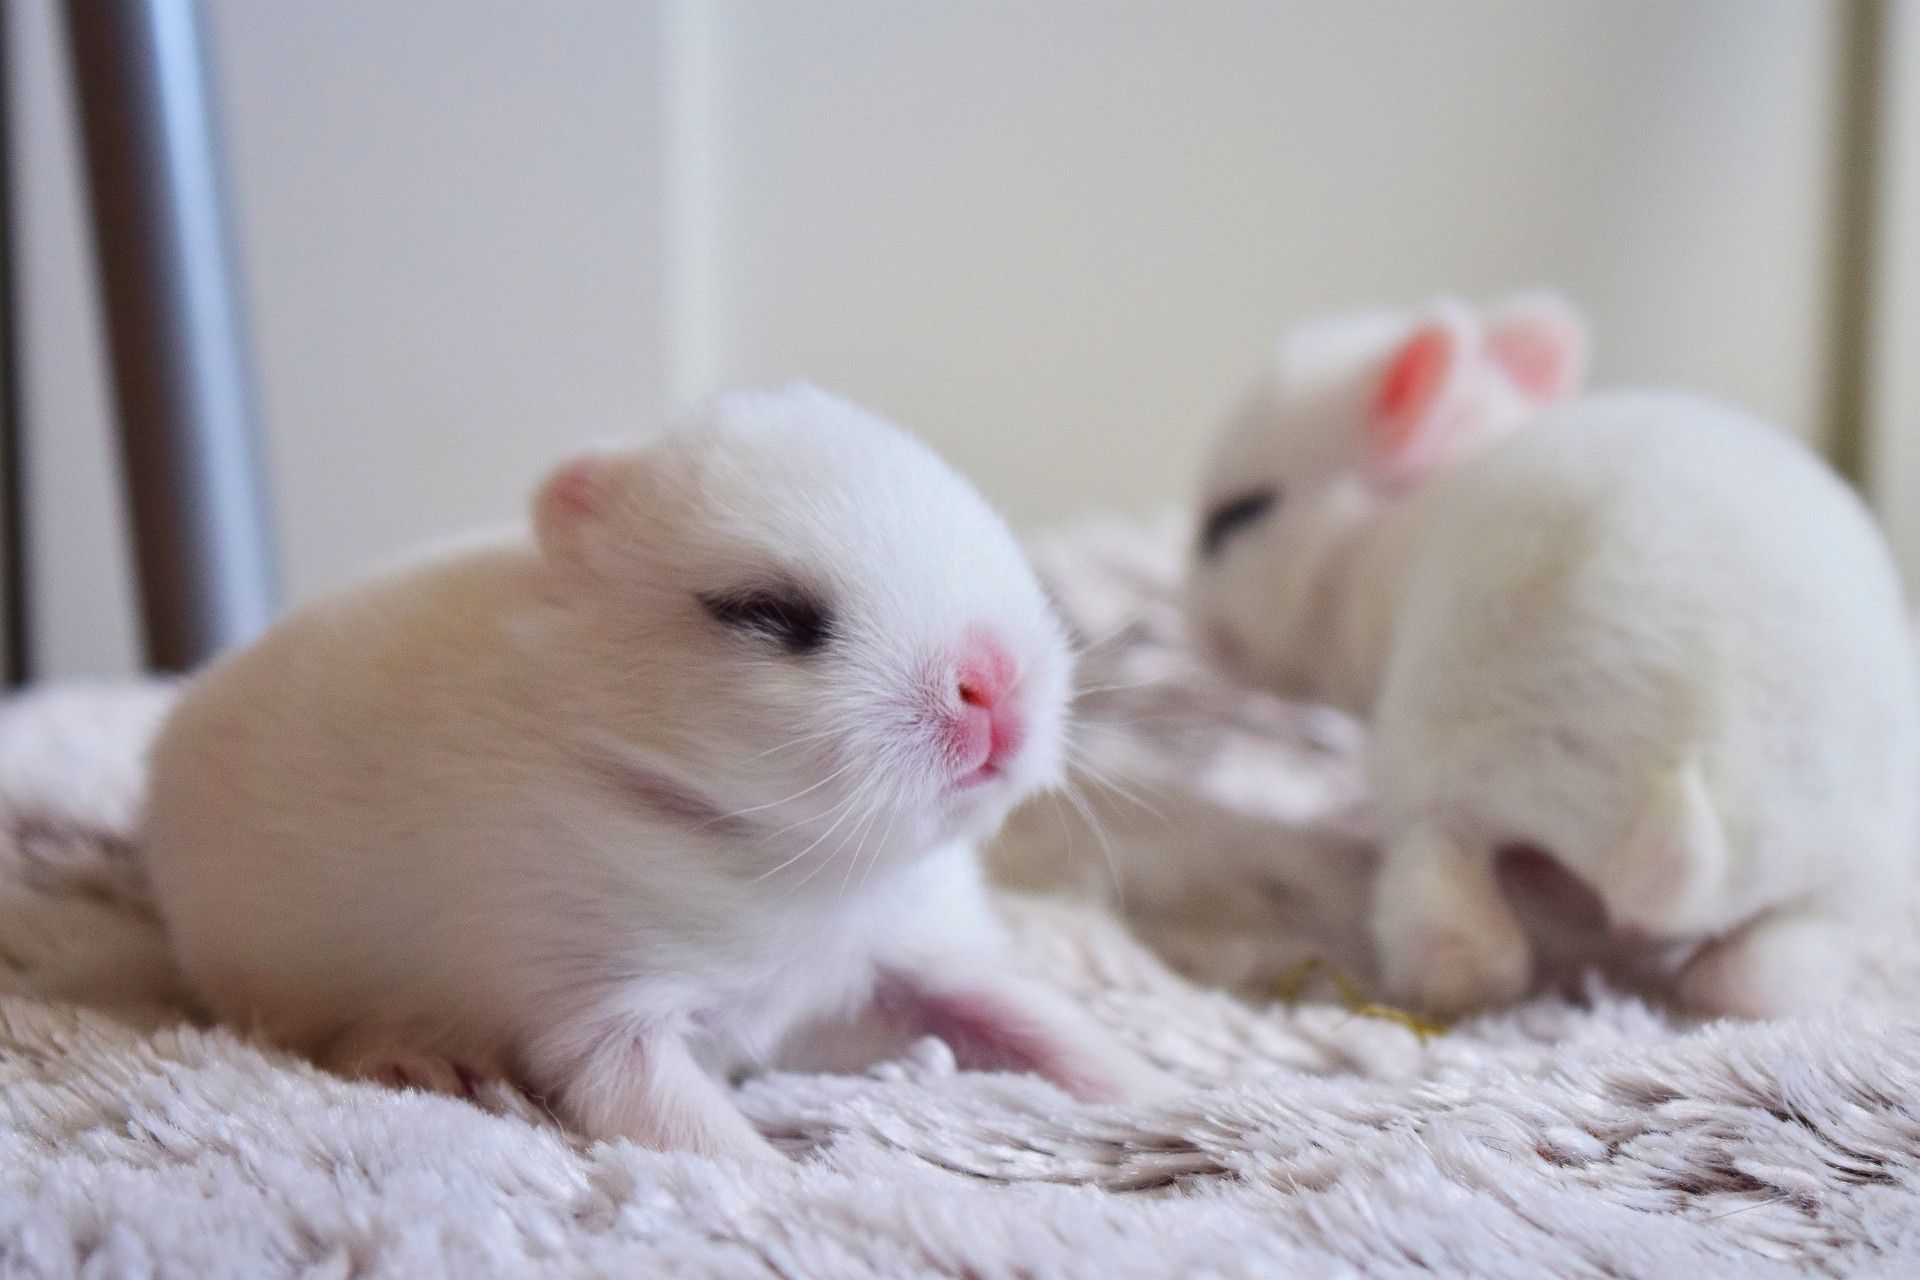 Are bunnies born with their eyes closed?